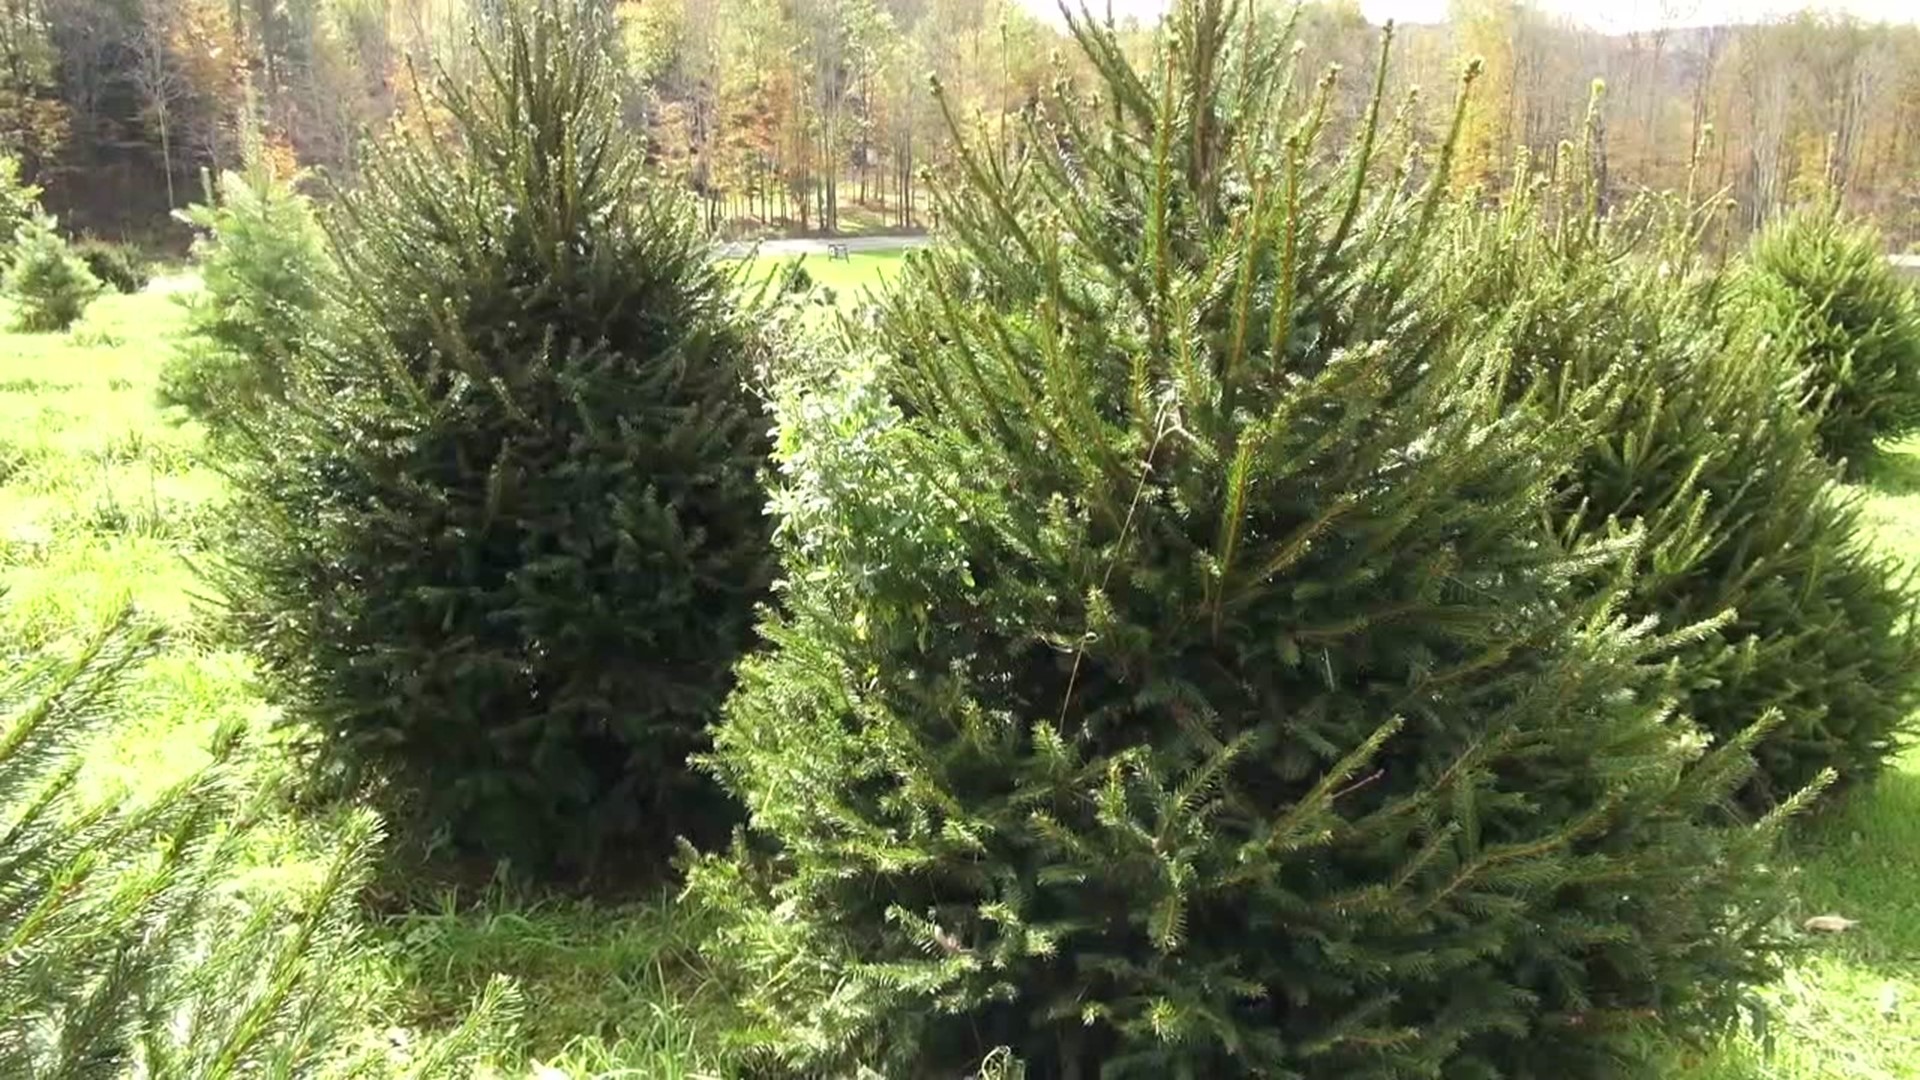 Newswatch 16's Ally Gallo talked to a Christmas tree farmer in Wayne County who says there are several reasons for the shortage